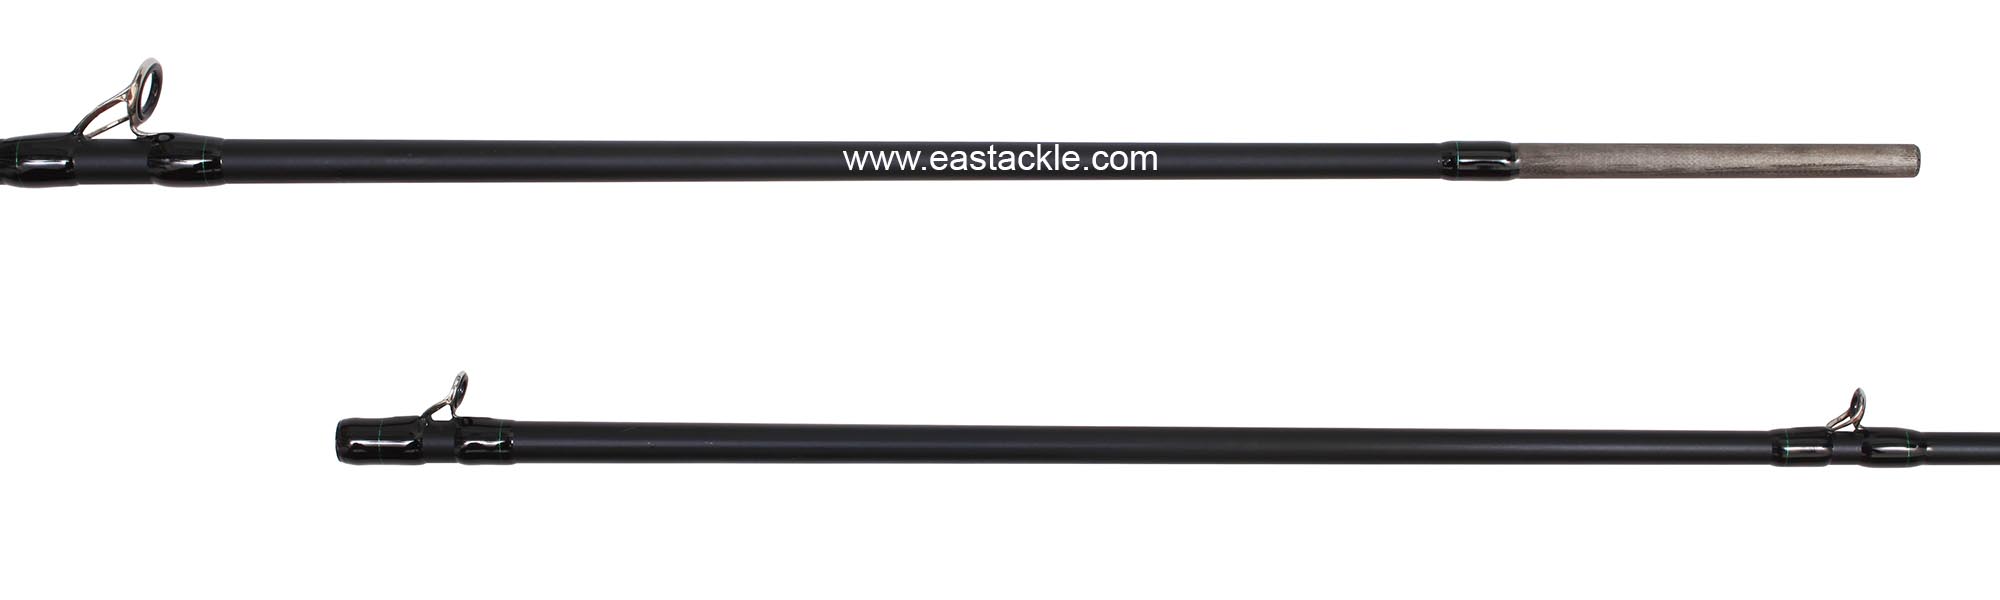 Rapala - Koivu - KVC652L - Bait Casting Rod - Joint Section (Side View) | Eastackle